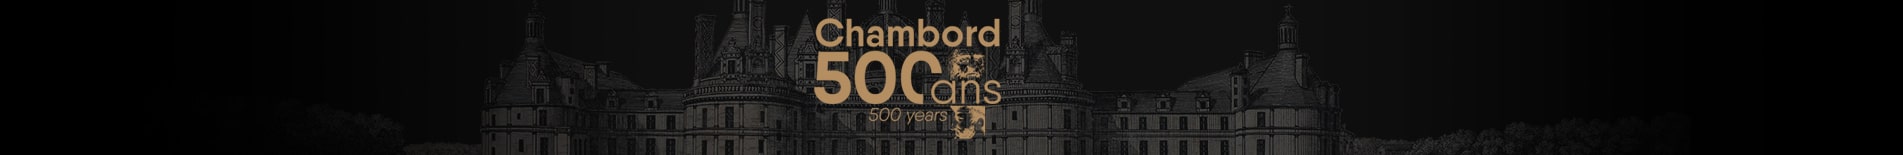 Château de Chambord construction began 500 years ago today – French  Crossroads